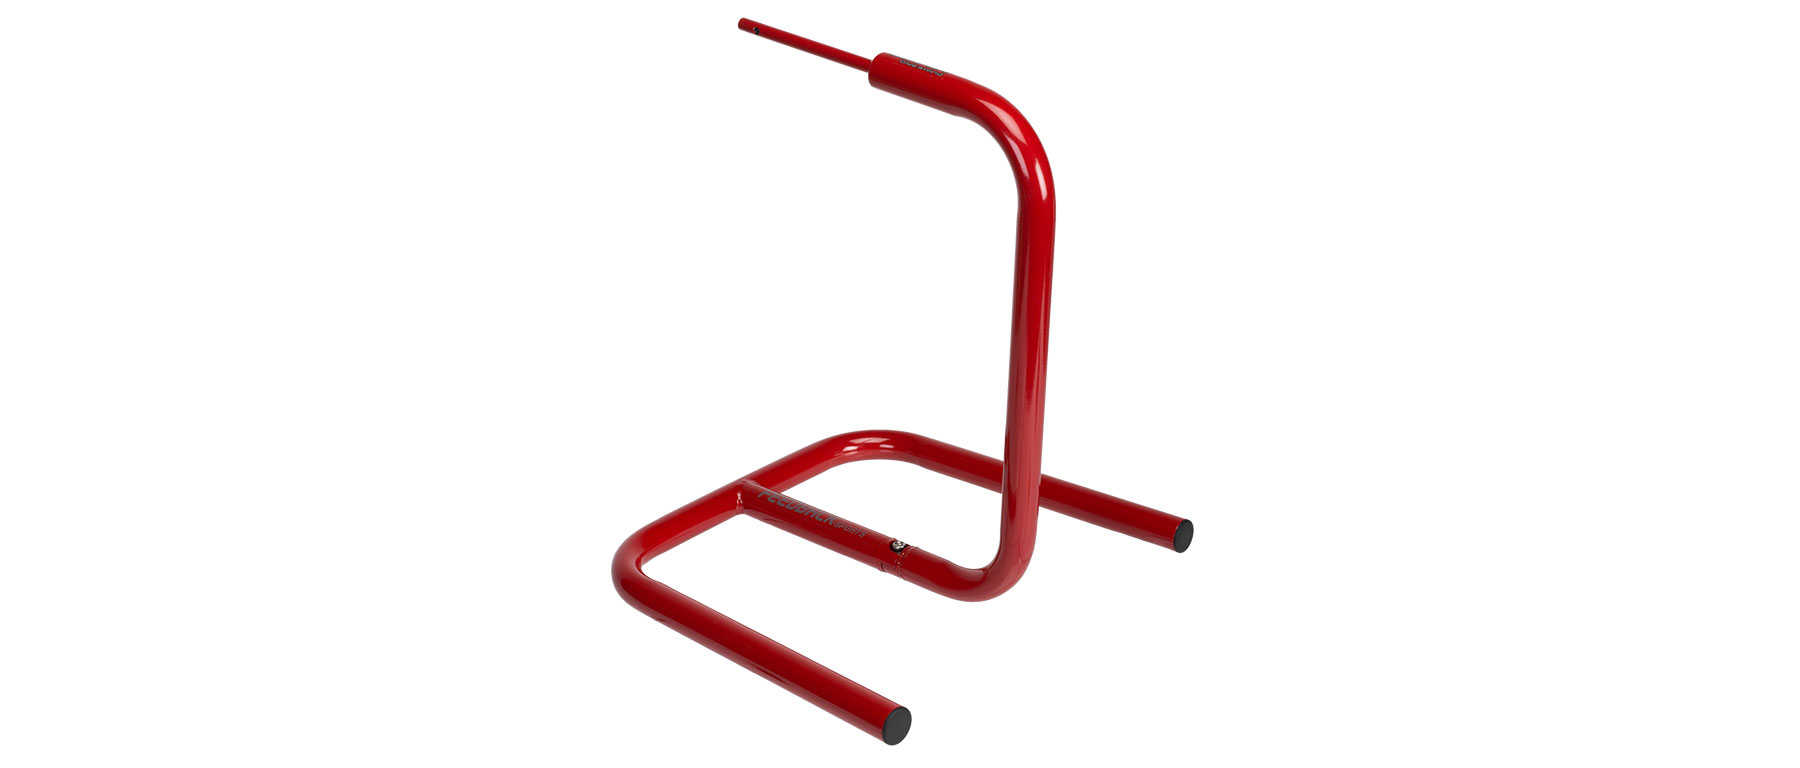 Feedback Sports Scorpion Bicycle Floor Stand